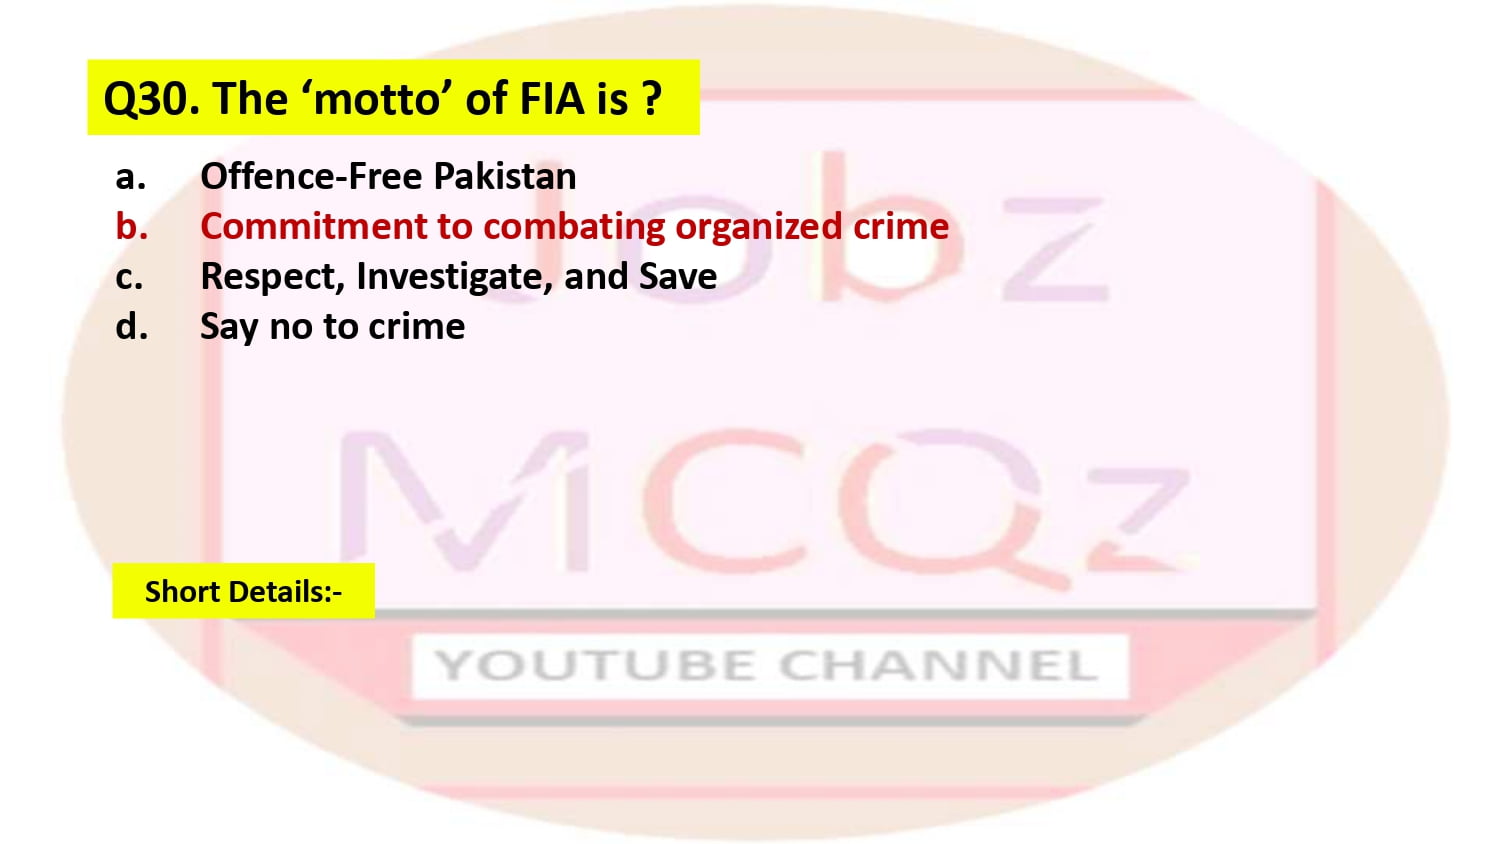 FIA Past Papers for Assistant,Sub Inspector,Steno typist,LDC